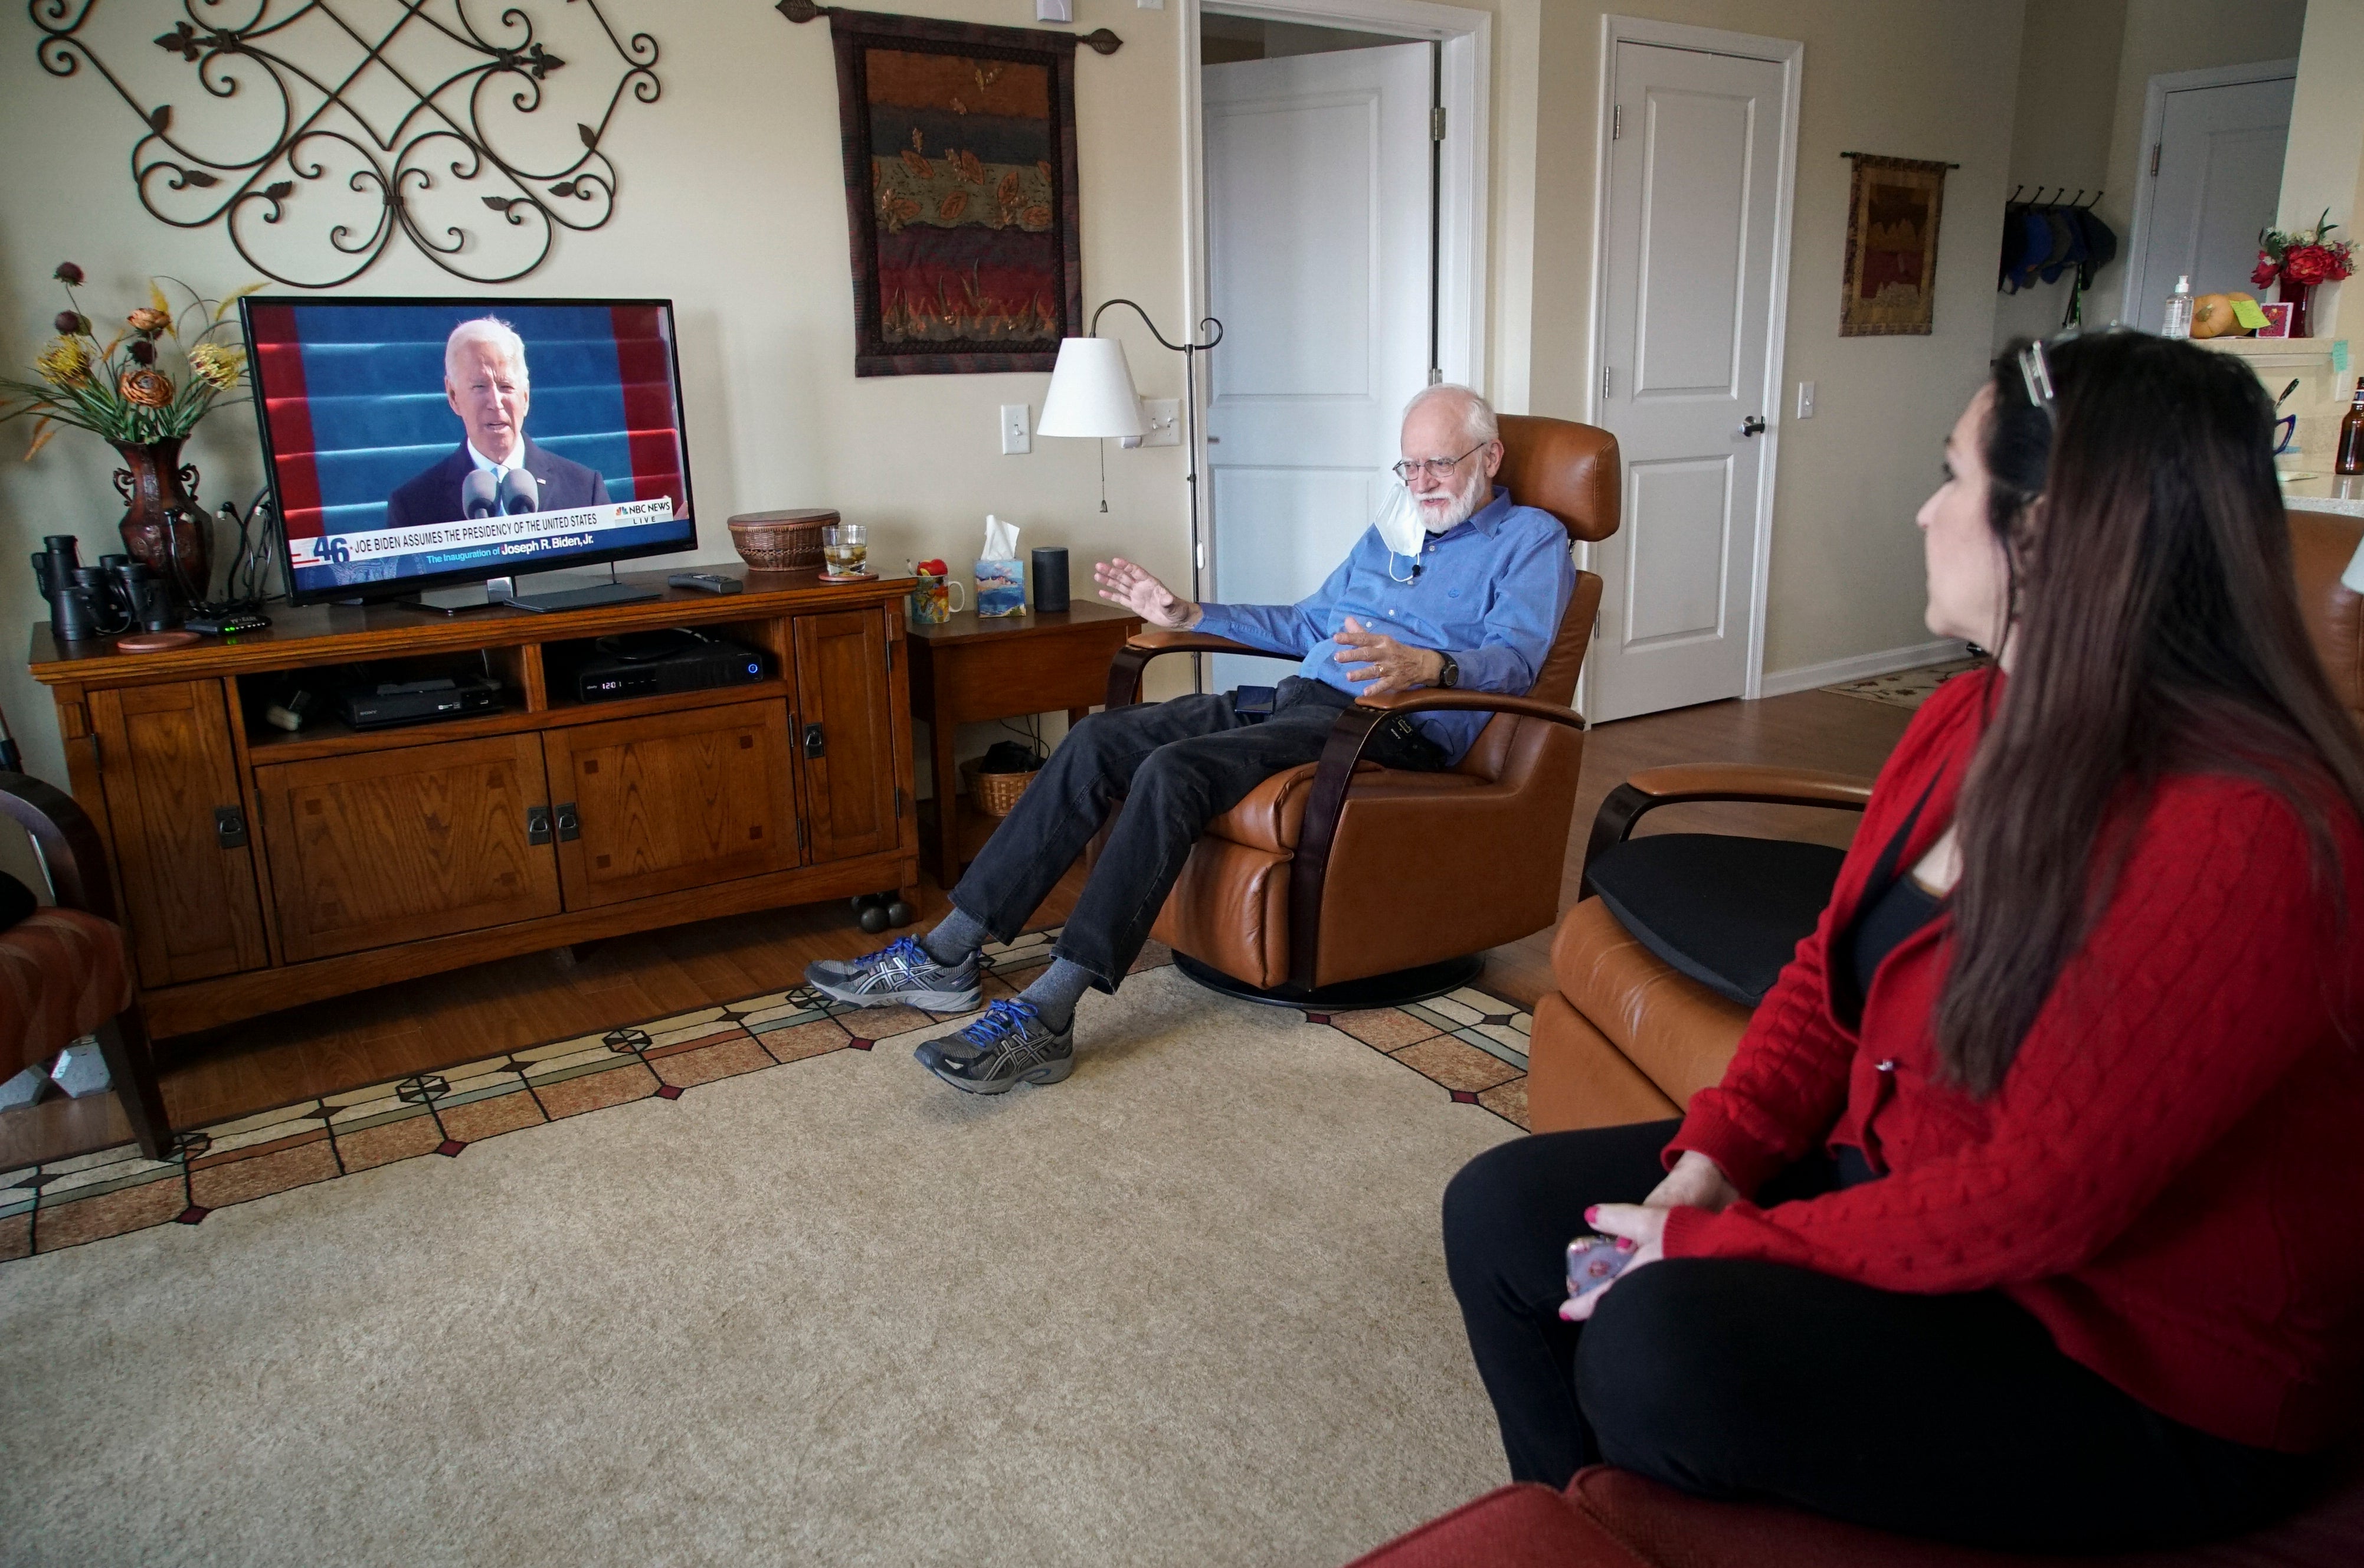 A Democrat and a Republican watch Biden’s inauguration together